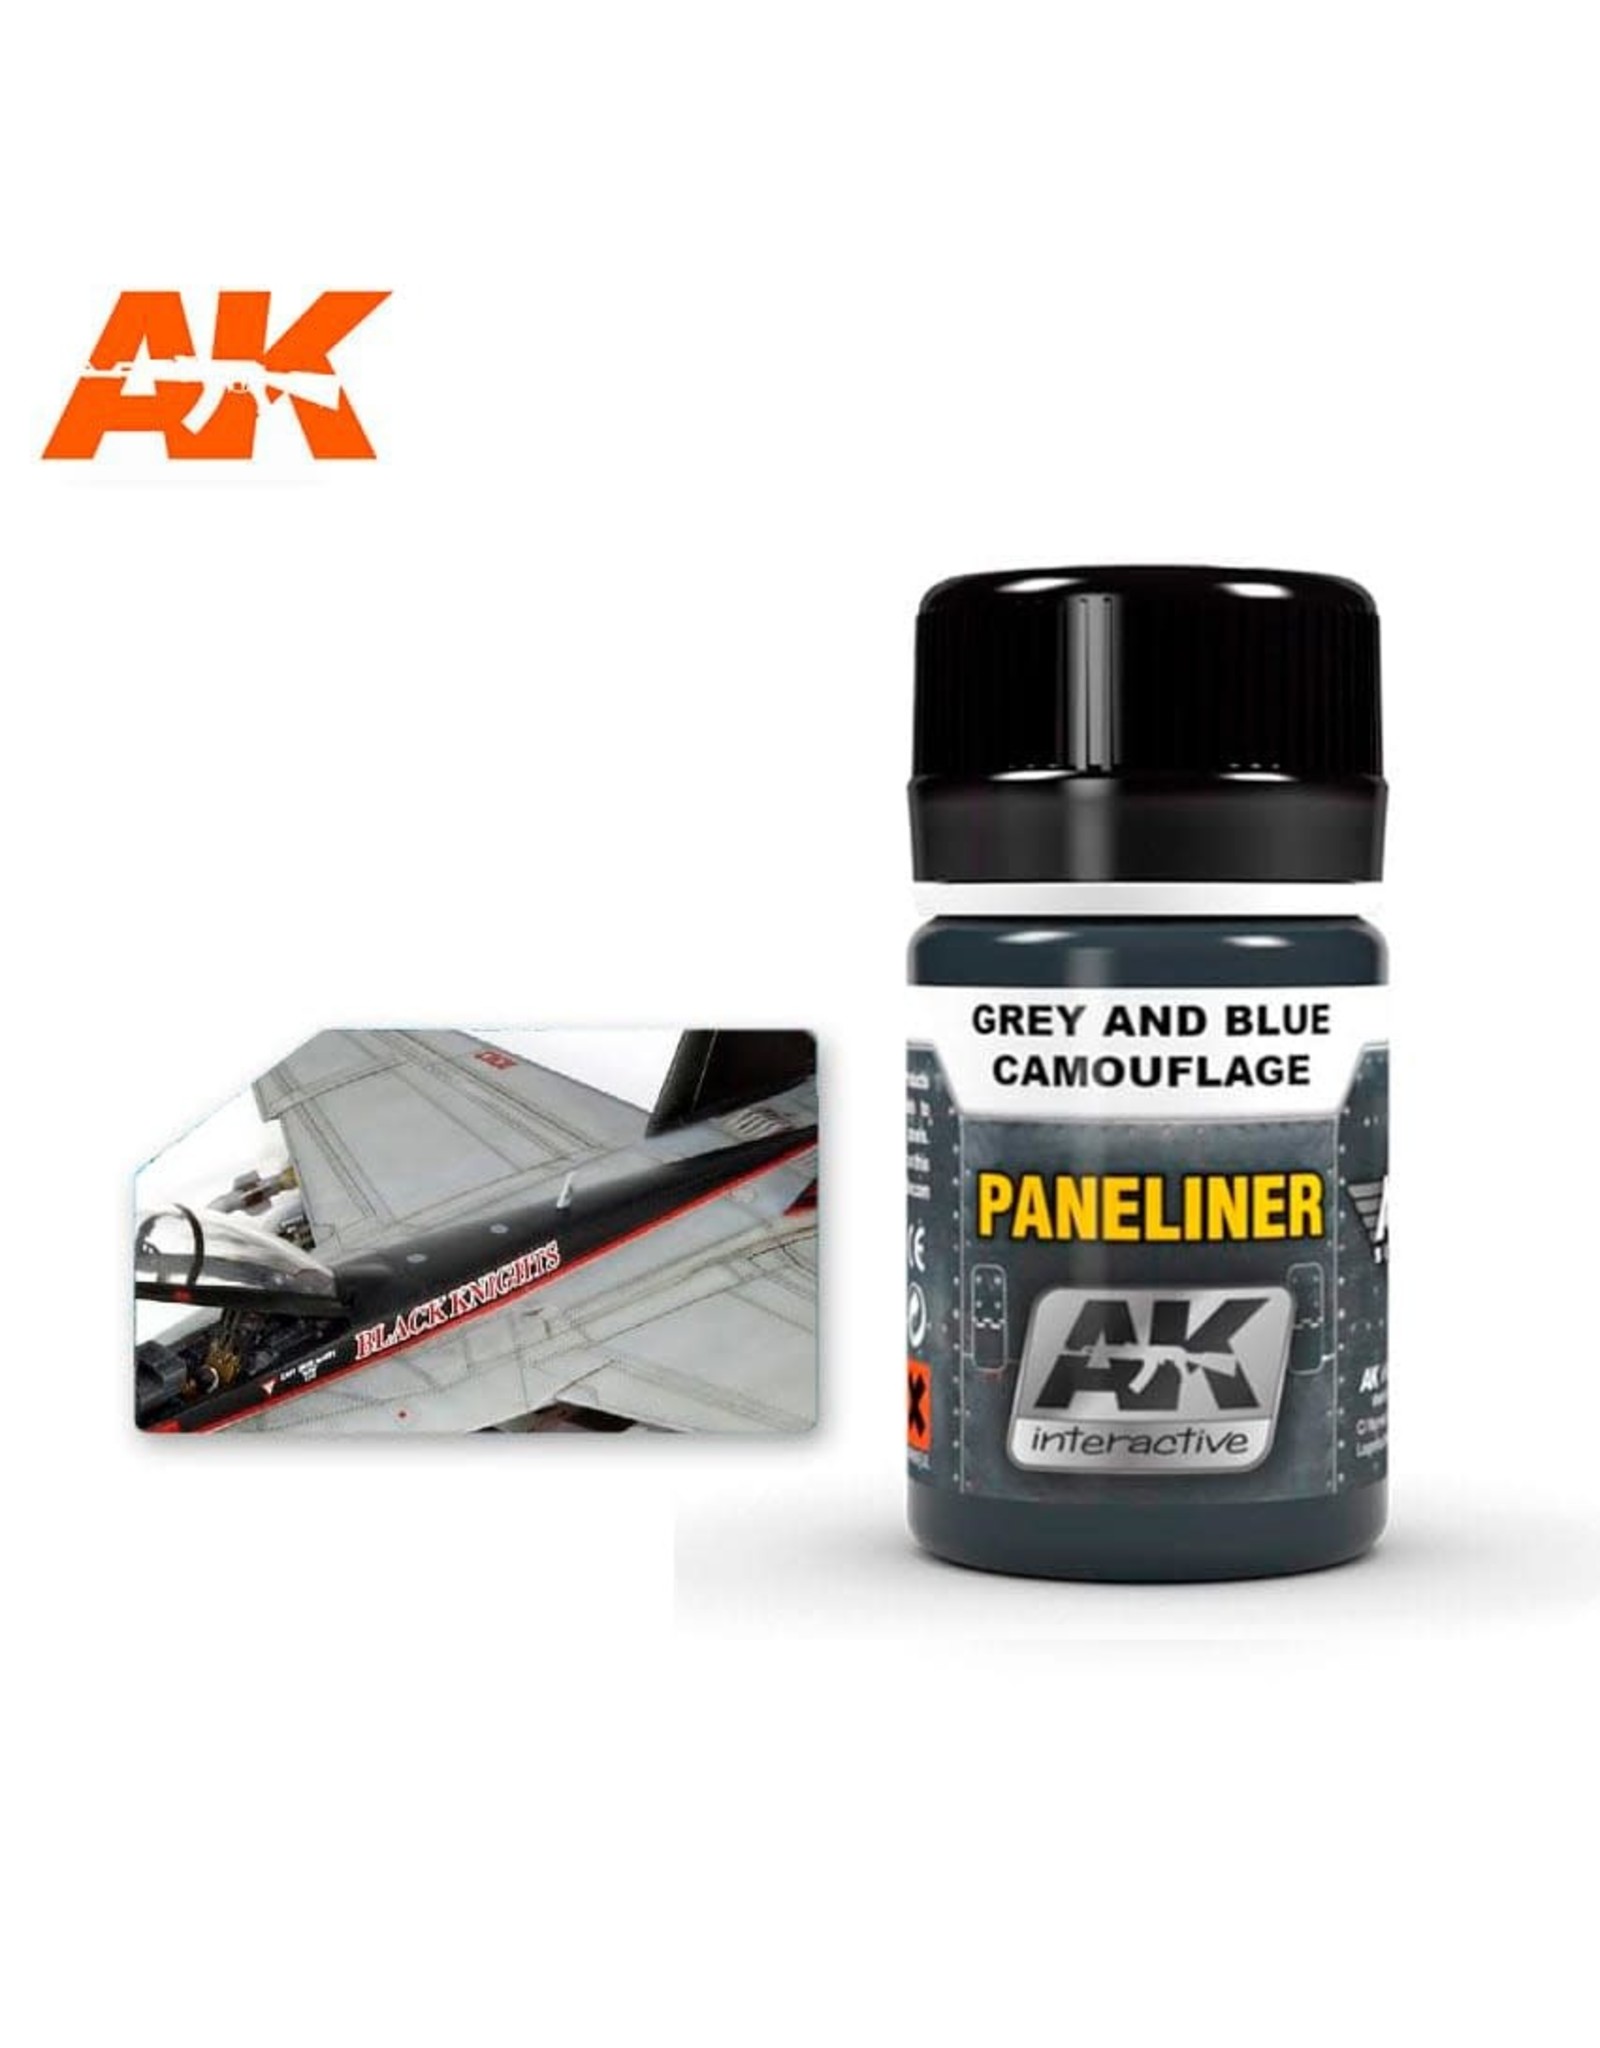 AK Interactive AK INTERACTIVE PANELINER FOR GREY AND BLUE CAMOUFLAGE 35ML